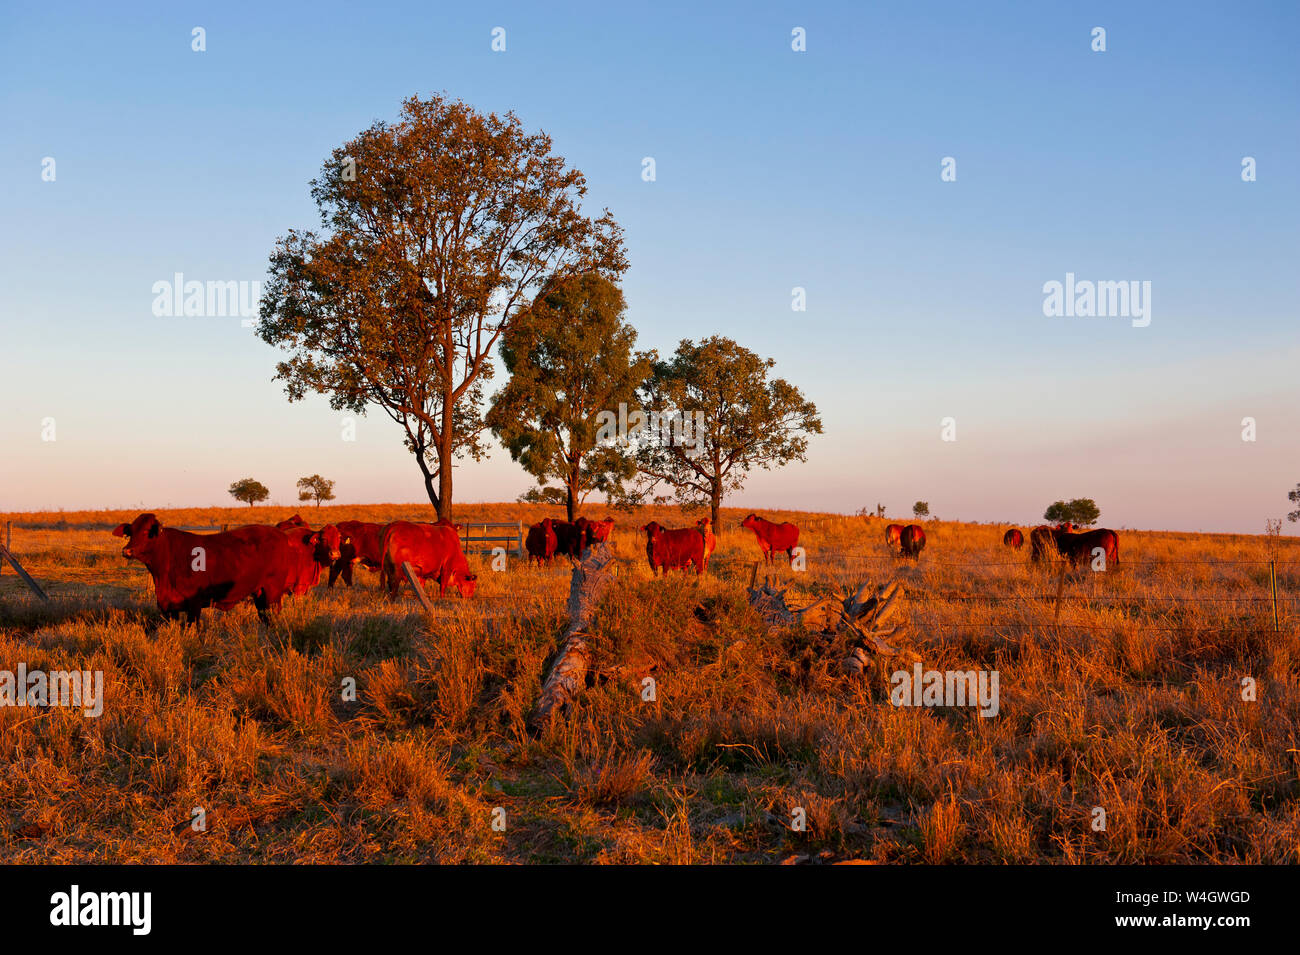 Cattle in late afternoon light, Carnavaron Gorge, Queensland, Australia Stock Photo